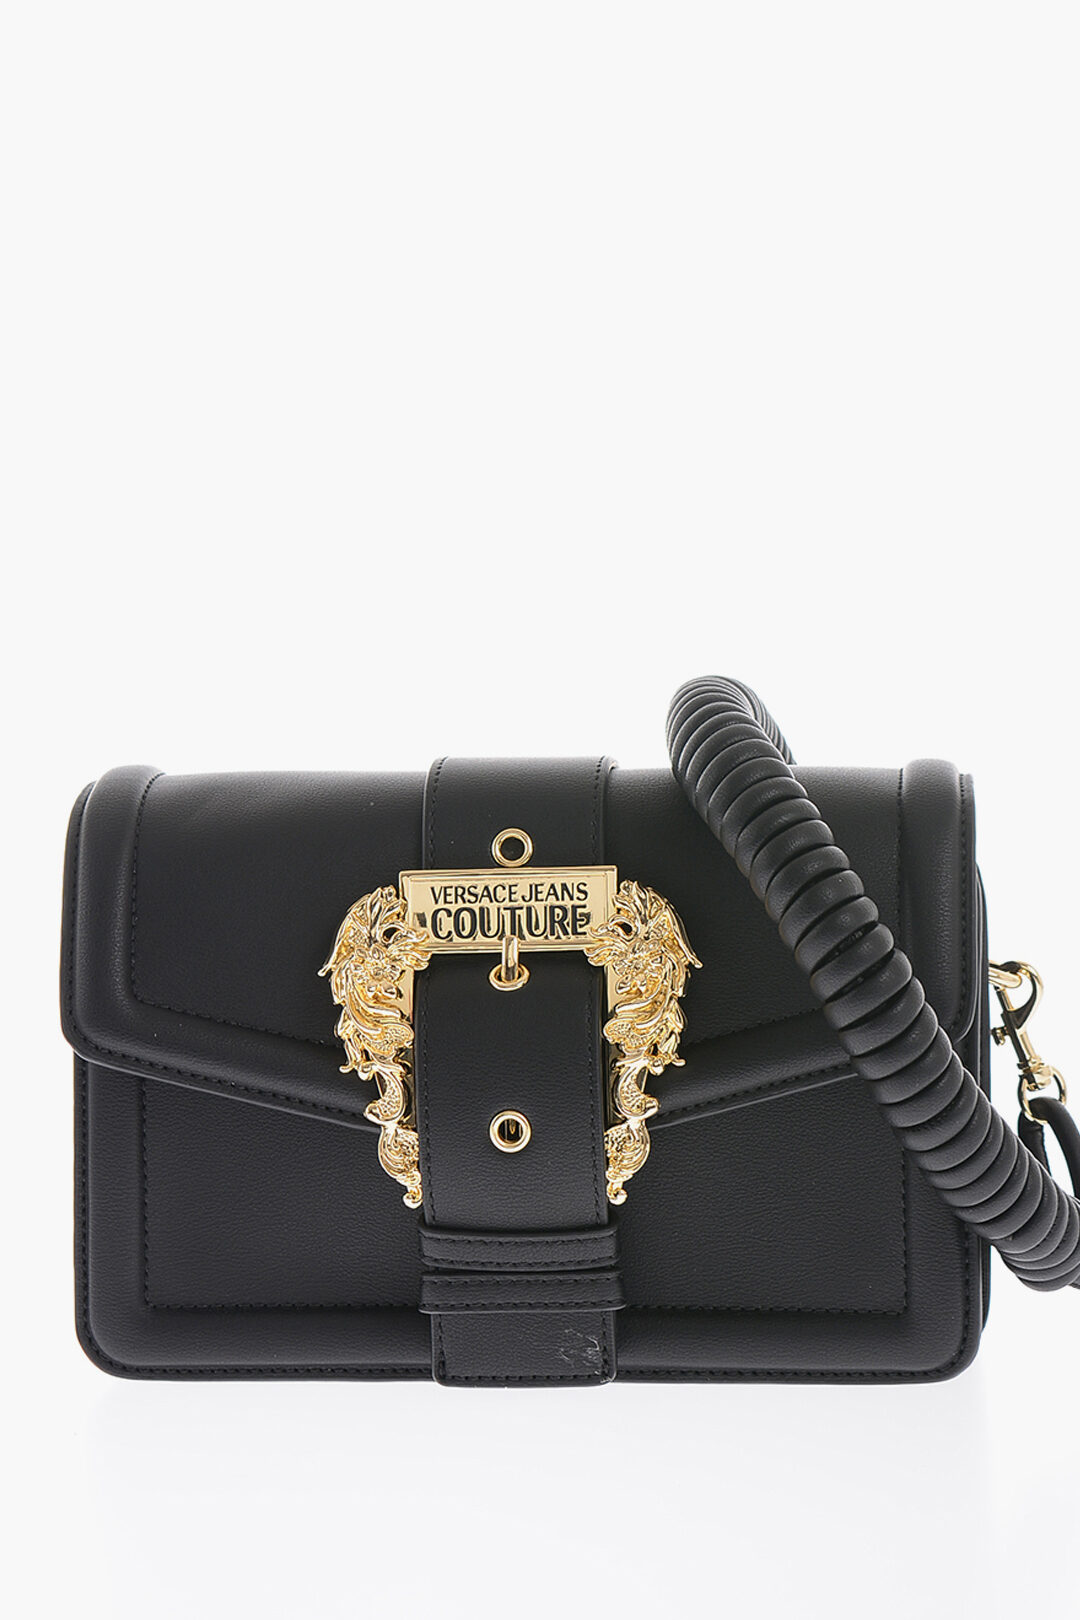 Versace JEANS COUTURE Faux leather bag Embellished with Maxi